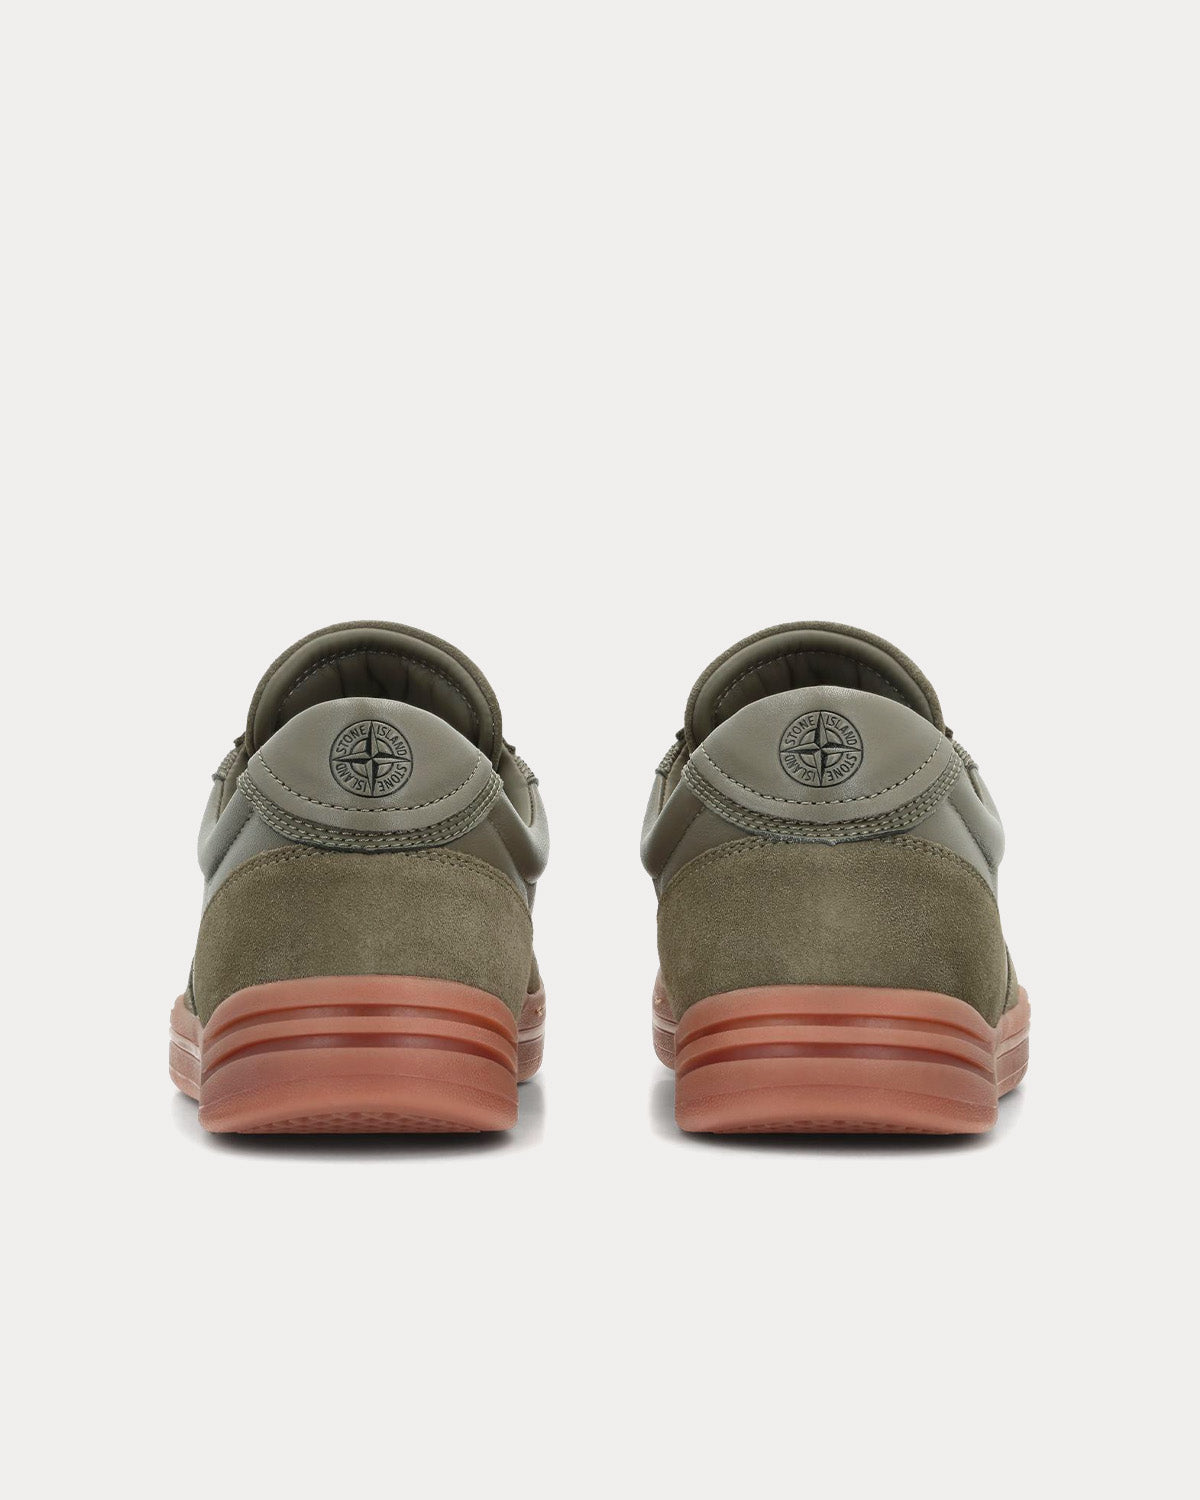 Stone Island - S0301 Military Green Low Top Sneakers